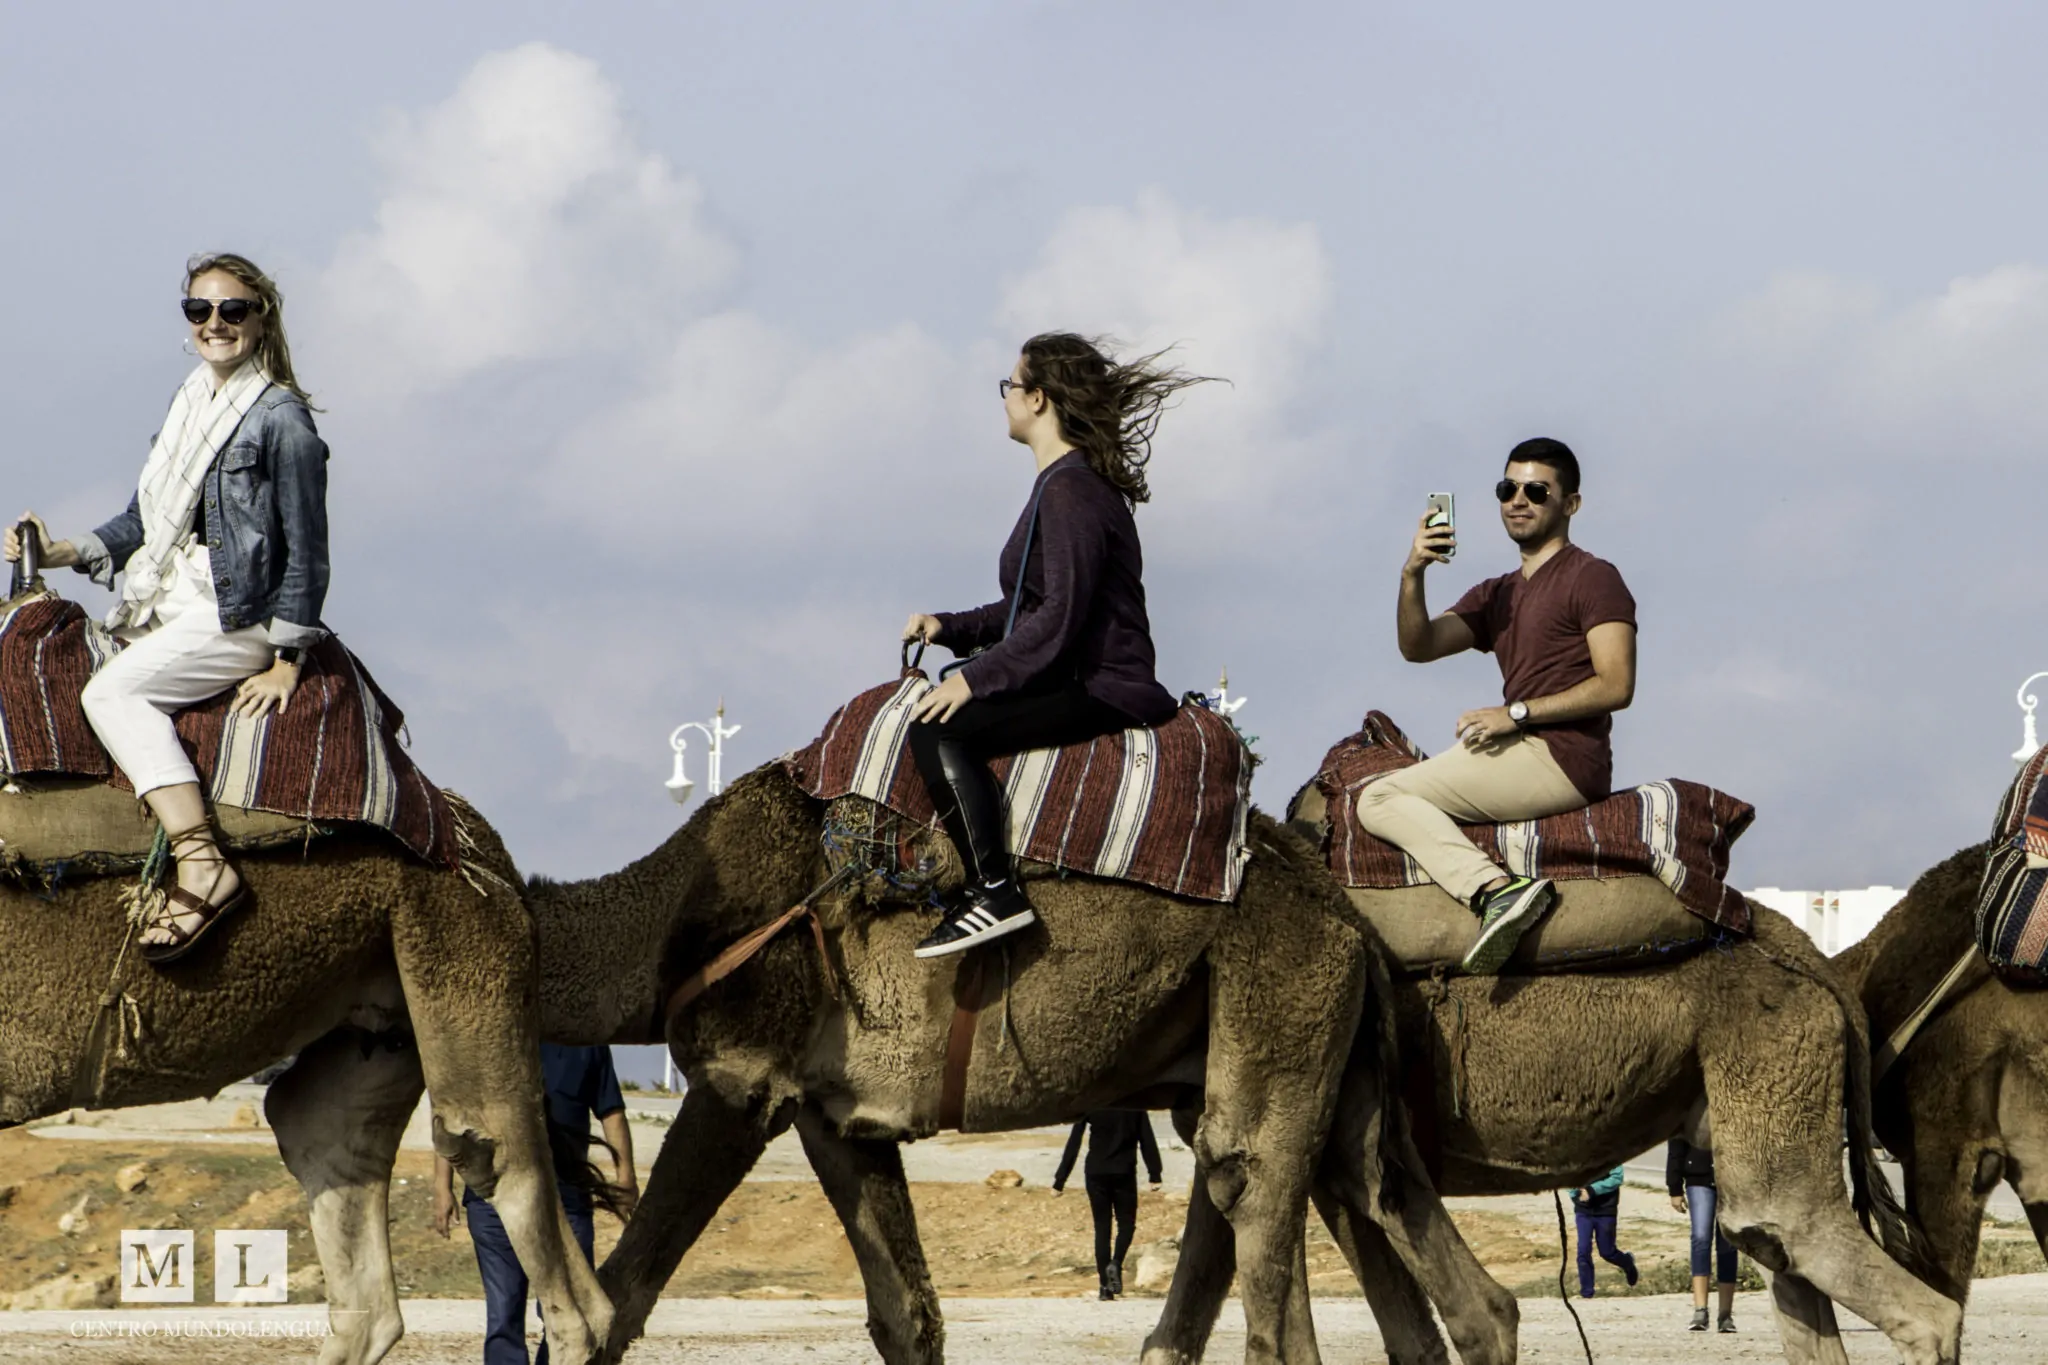 Riding Camels on Educational Tours